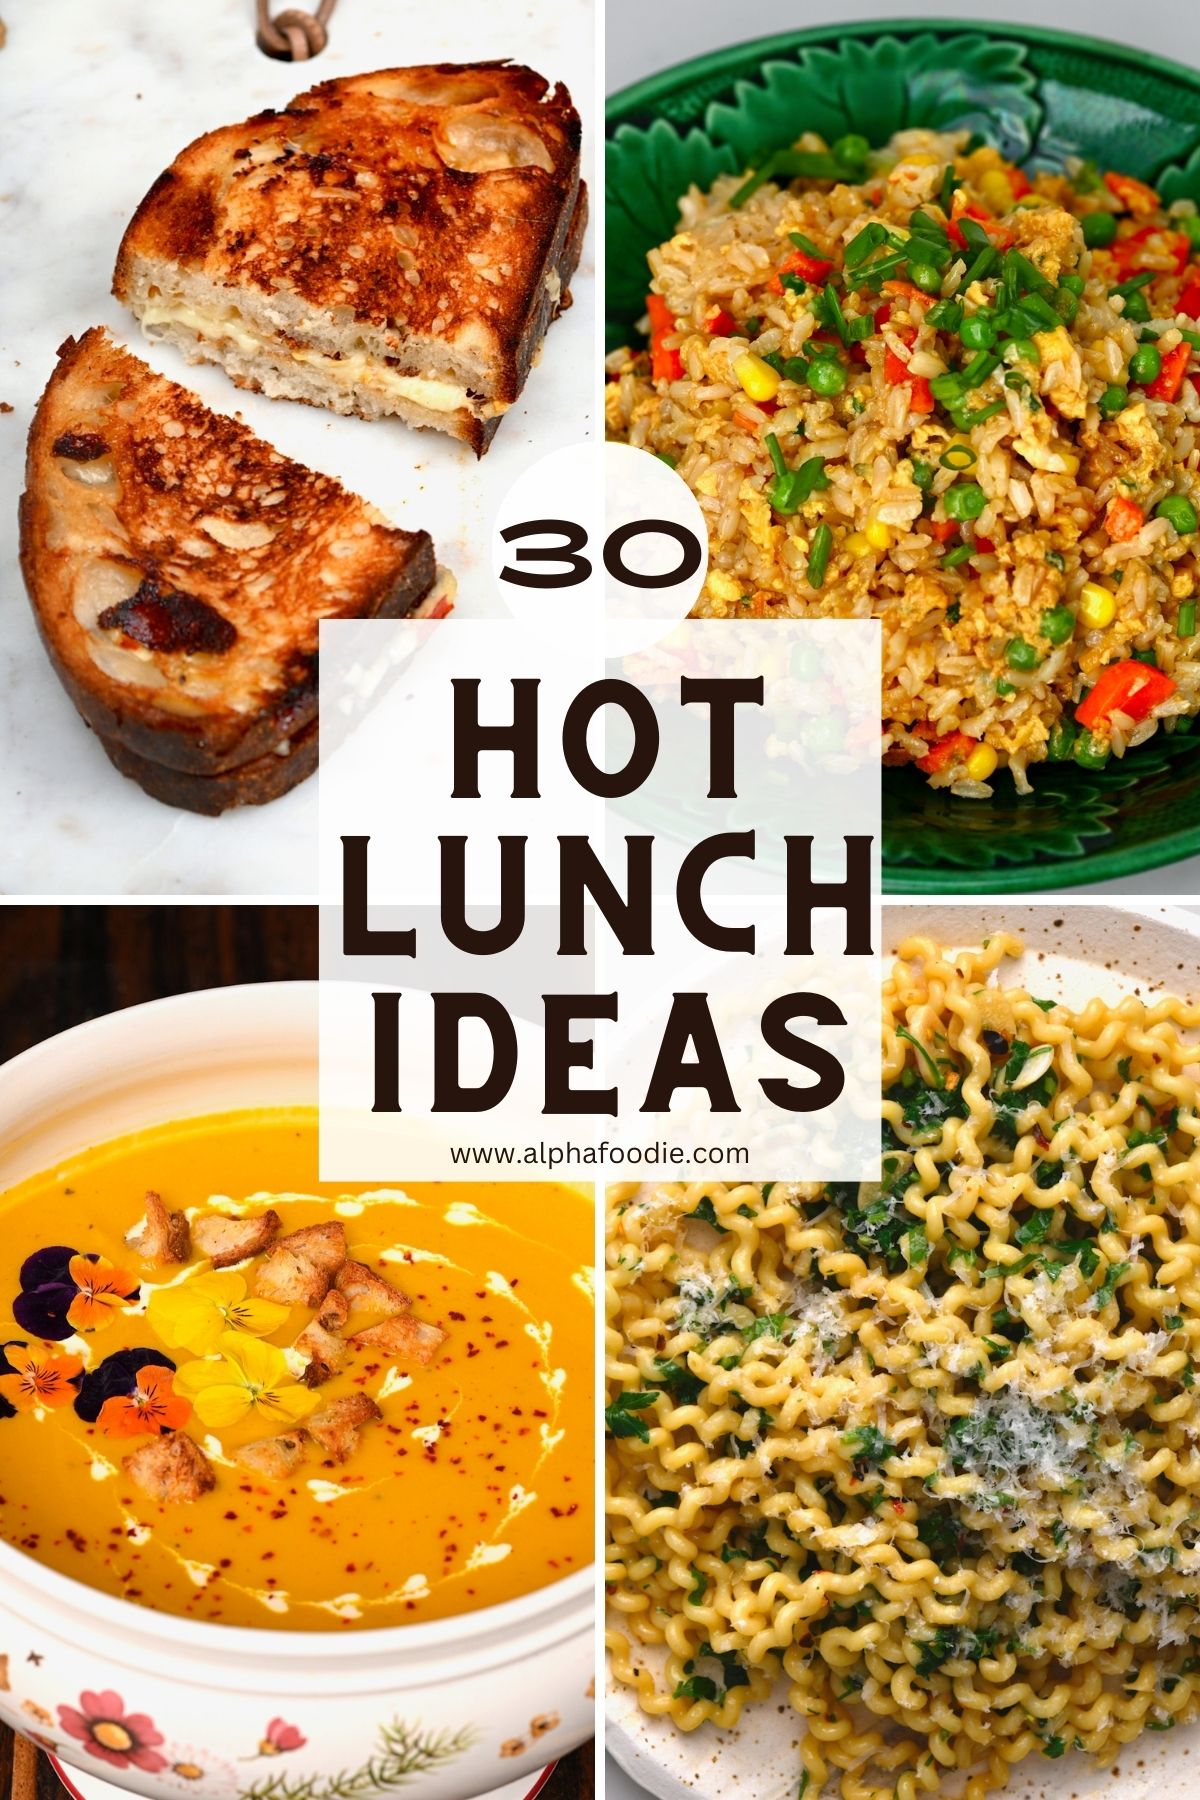 24 Hot Lunch Ideas to Warm You Up - Insanely Good